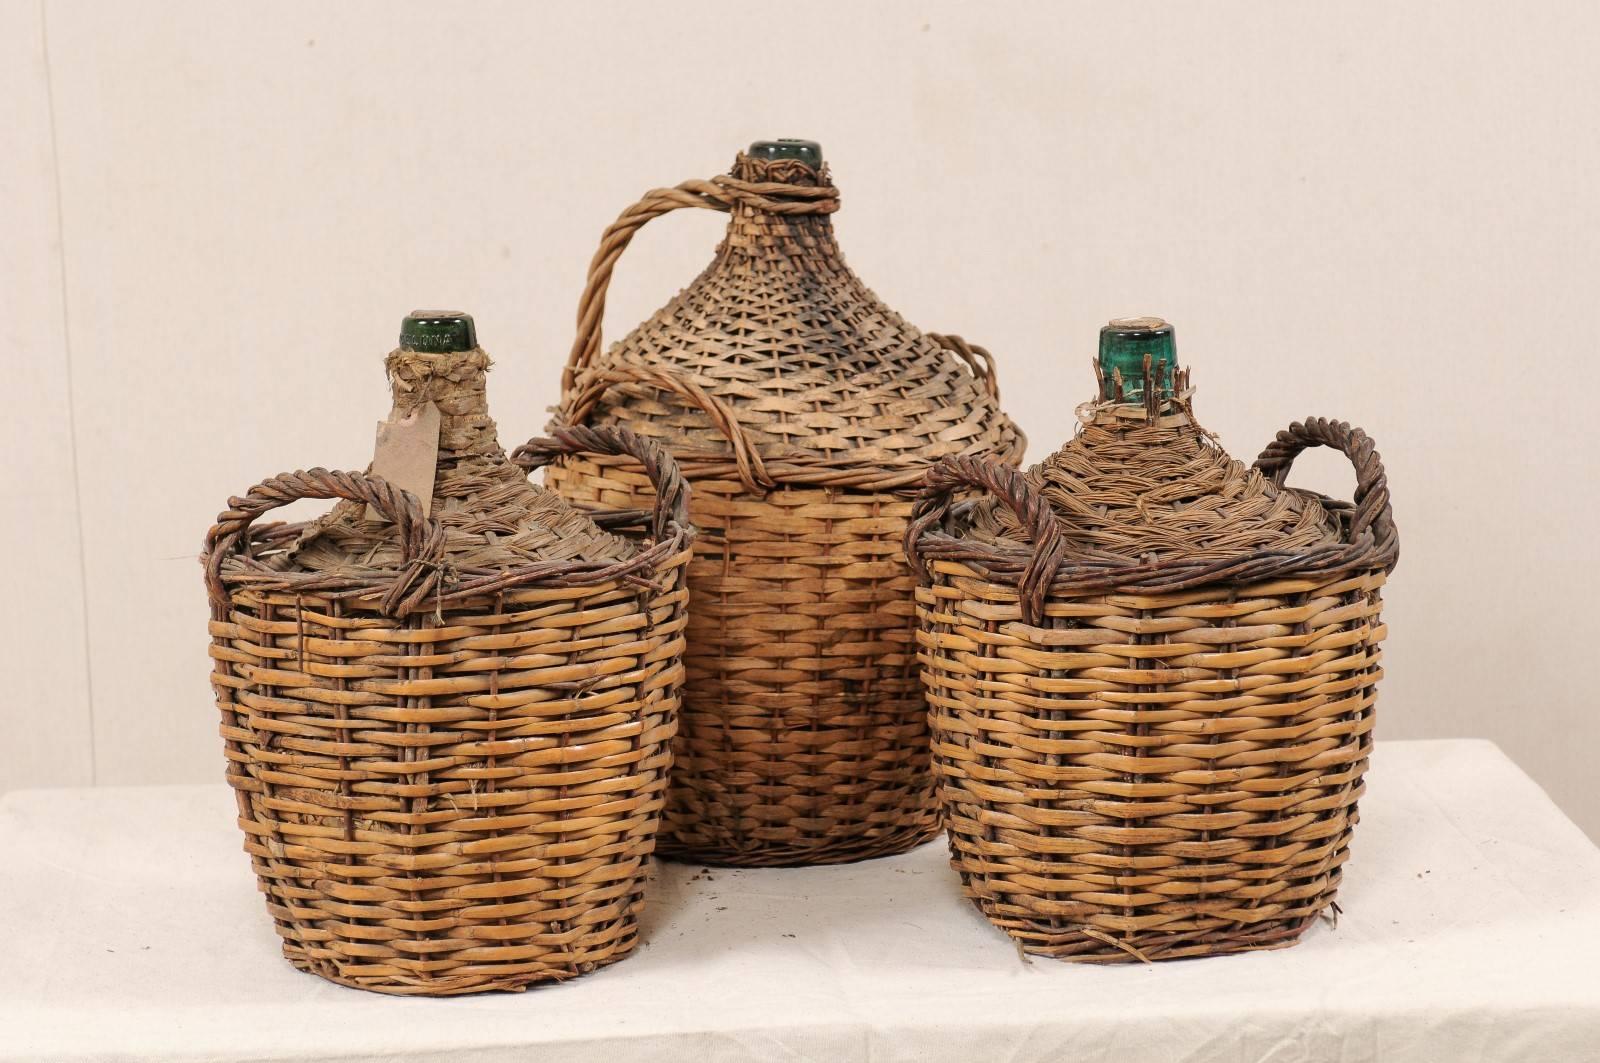 A set of three of midcentury French vintner woven baskets with demijohn wine bottles. This set of French vintner wicker-woven baskets, each containing a green colored, demijohn wine bottle. One basket is a two-handled, while the other two each have